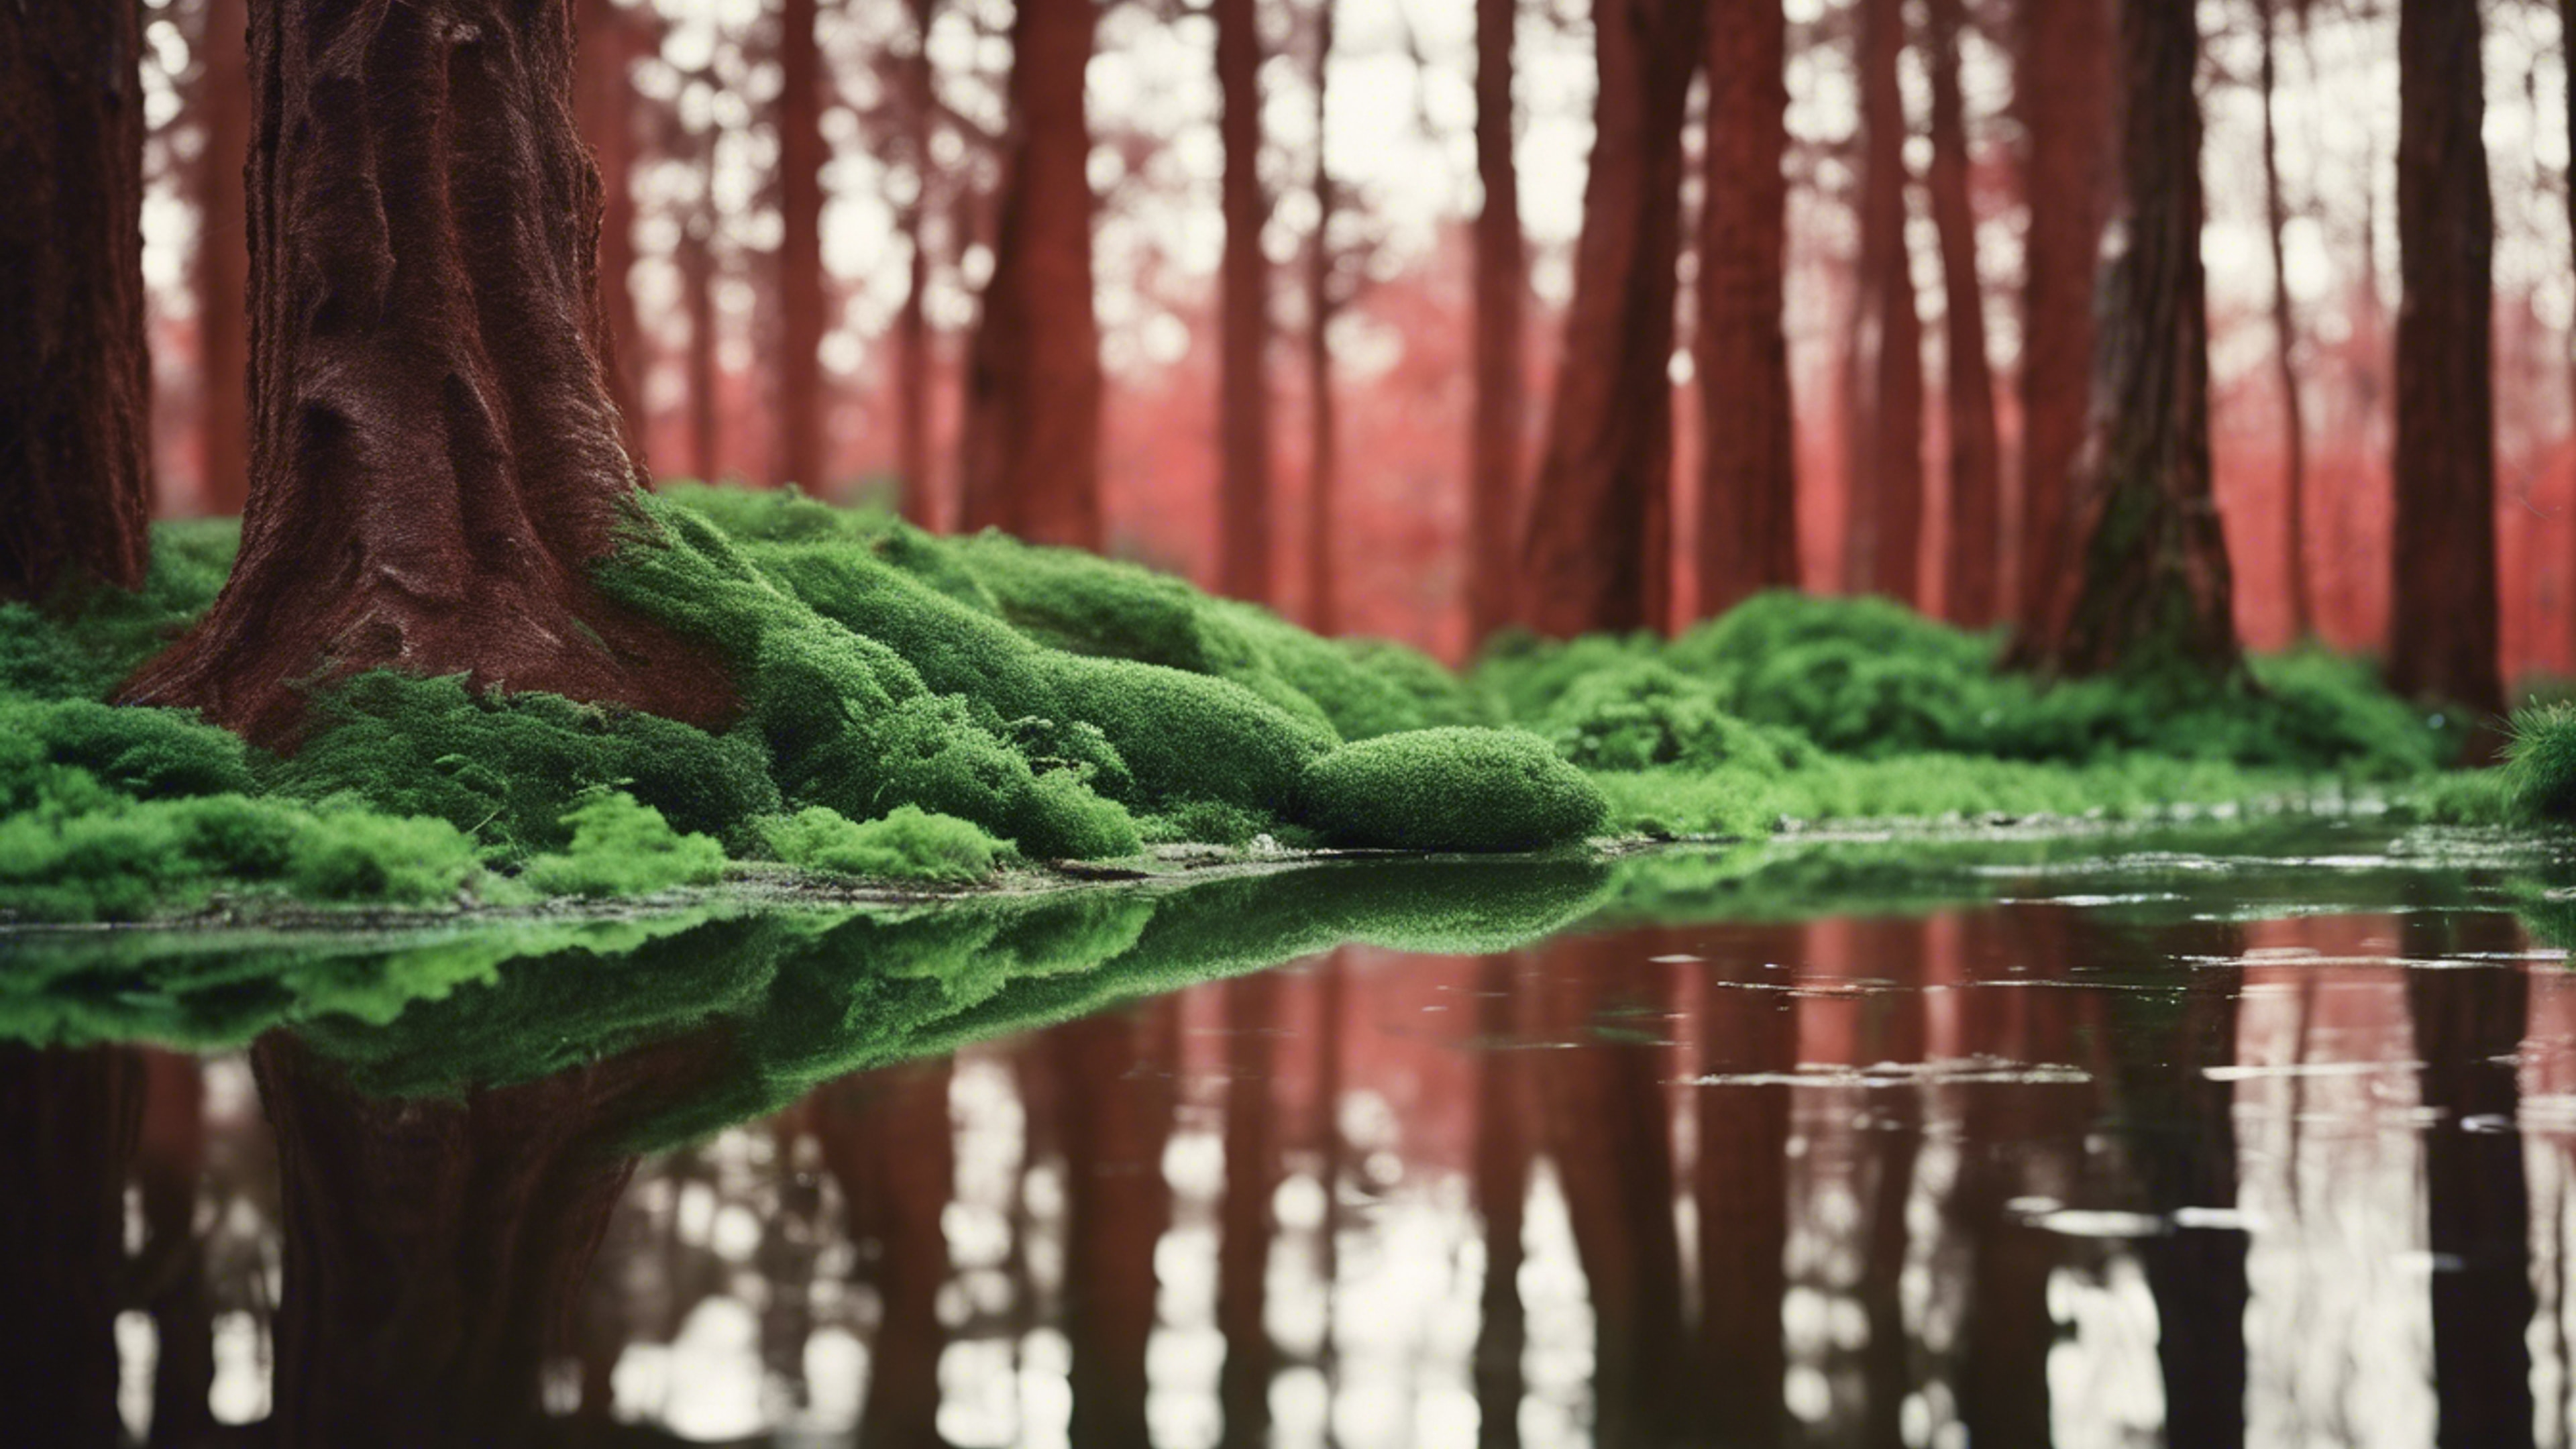 Lush, green forest reflections on a shiny, red leather surface. Tapetai[6f4e1618f75b40719461]